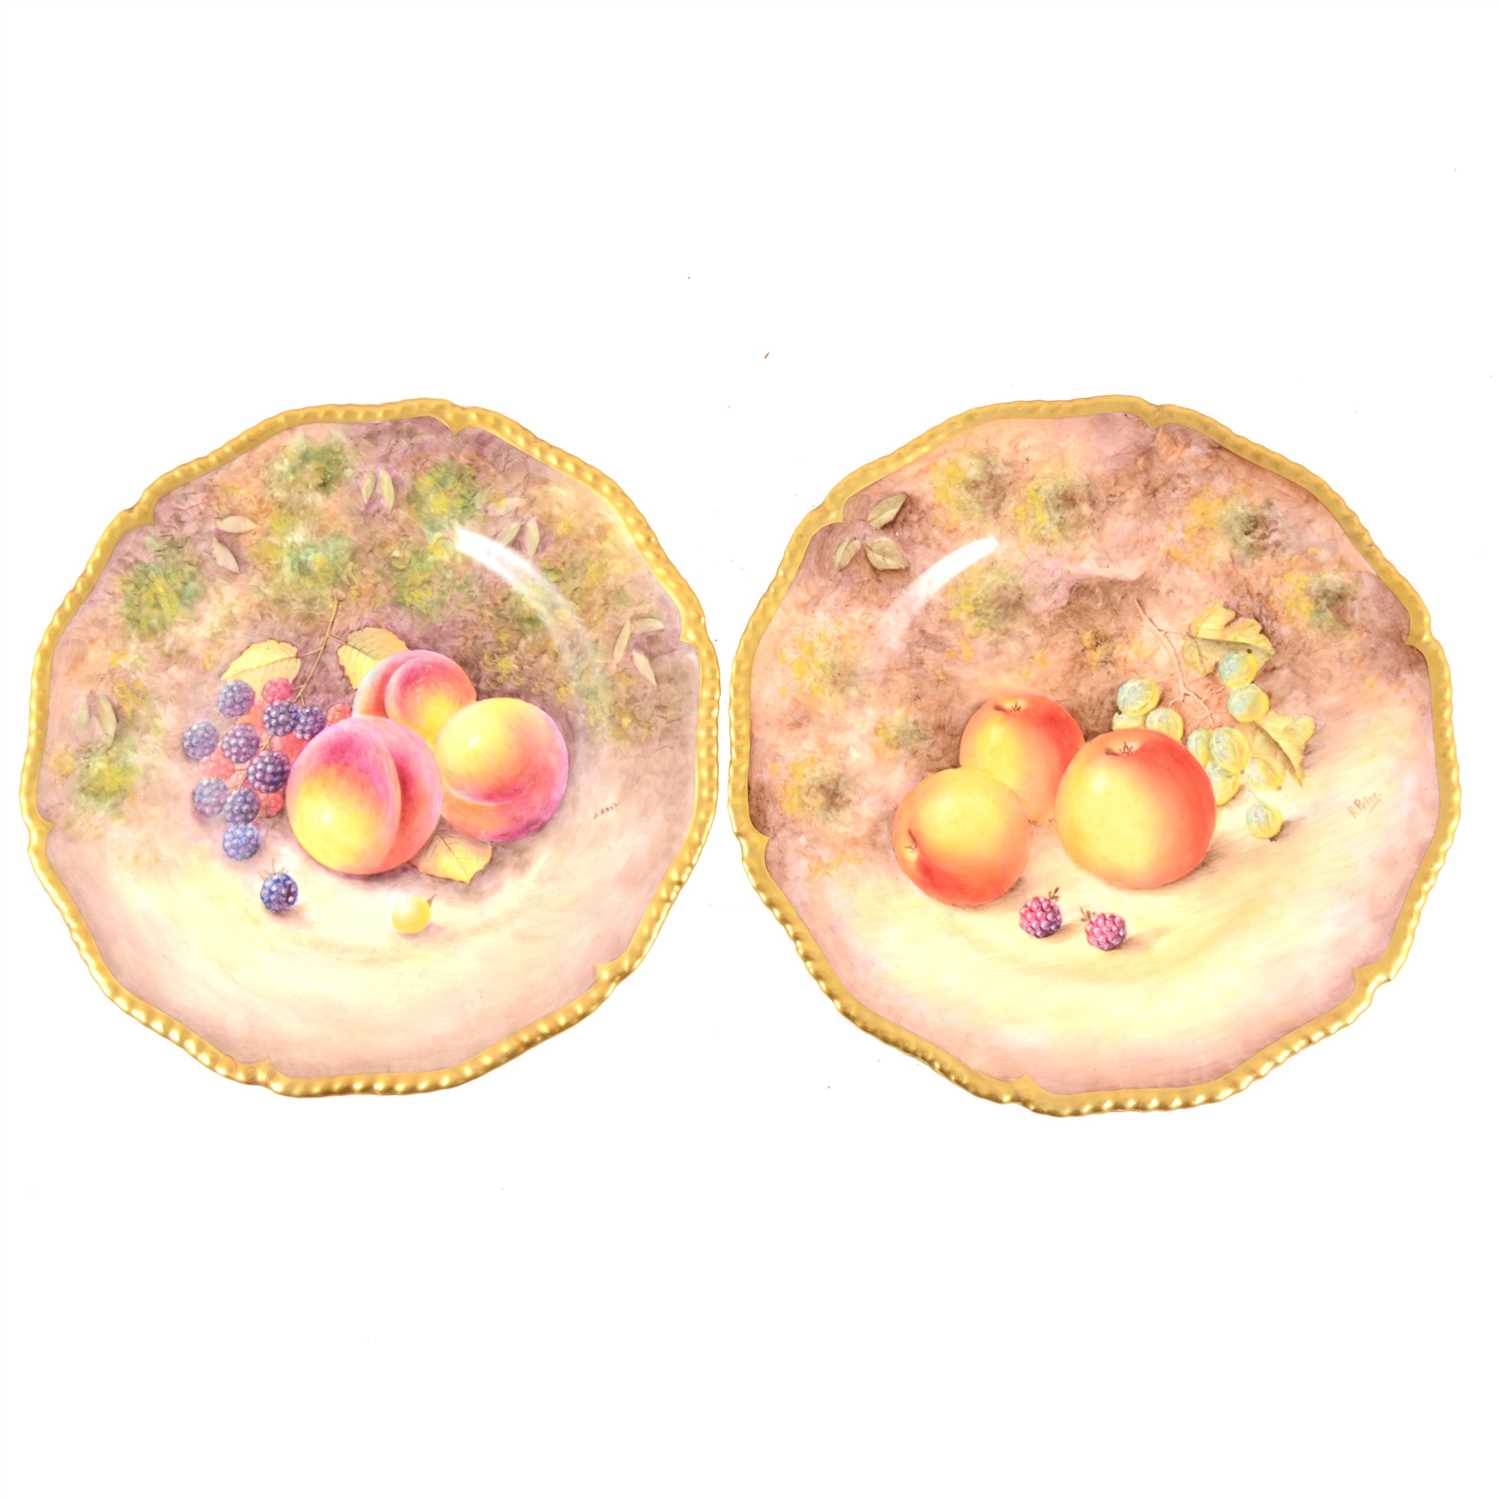 Lot 11 - Two Royal Worcester hand painted fruit design plates signed R Price and J Reed